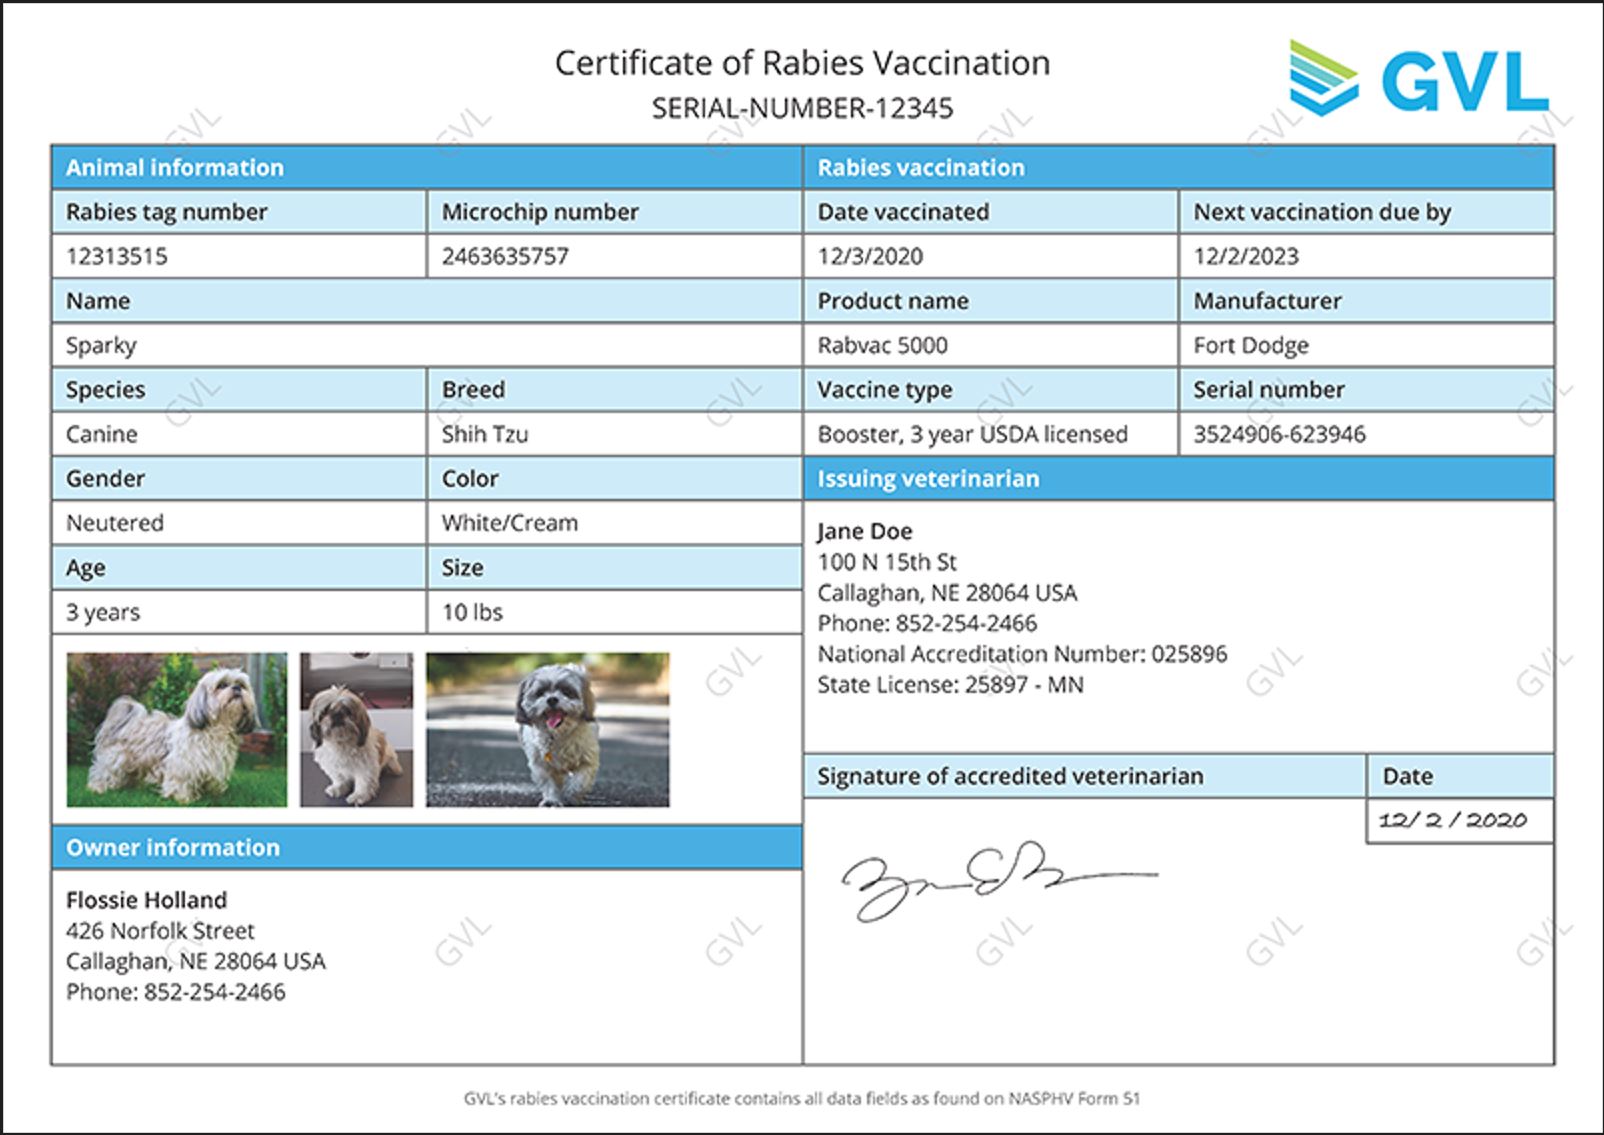 How to Get a Copy of My Dogs Rabies Certificate?